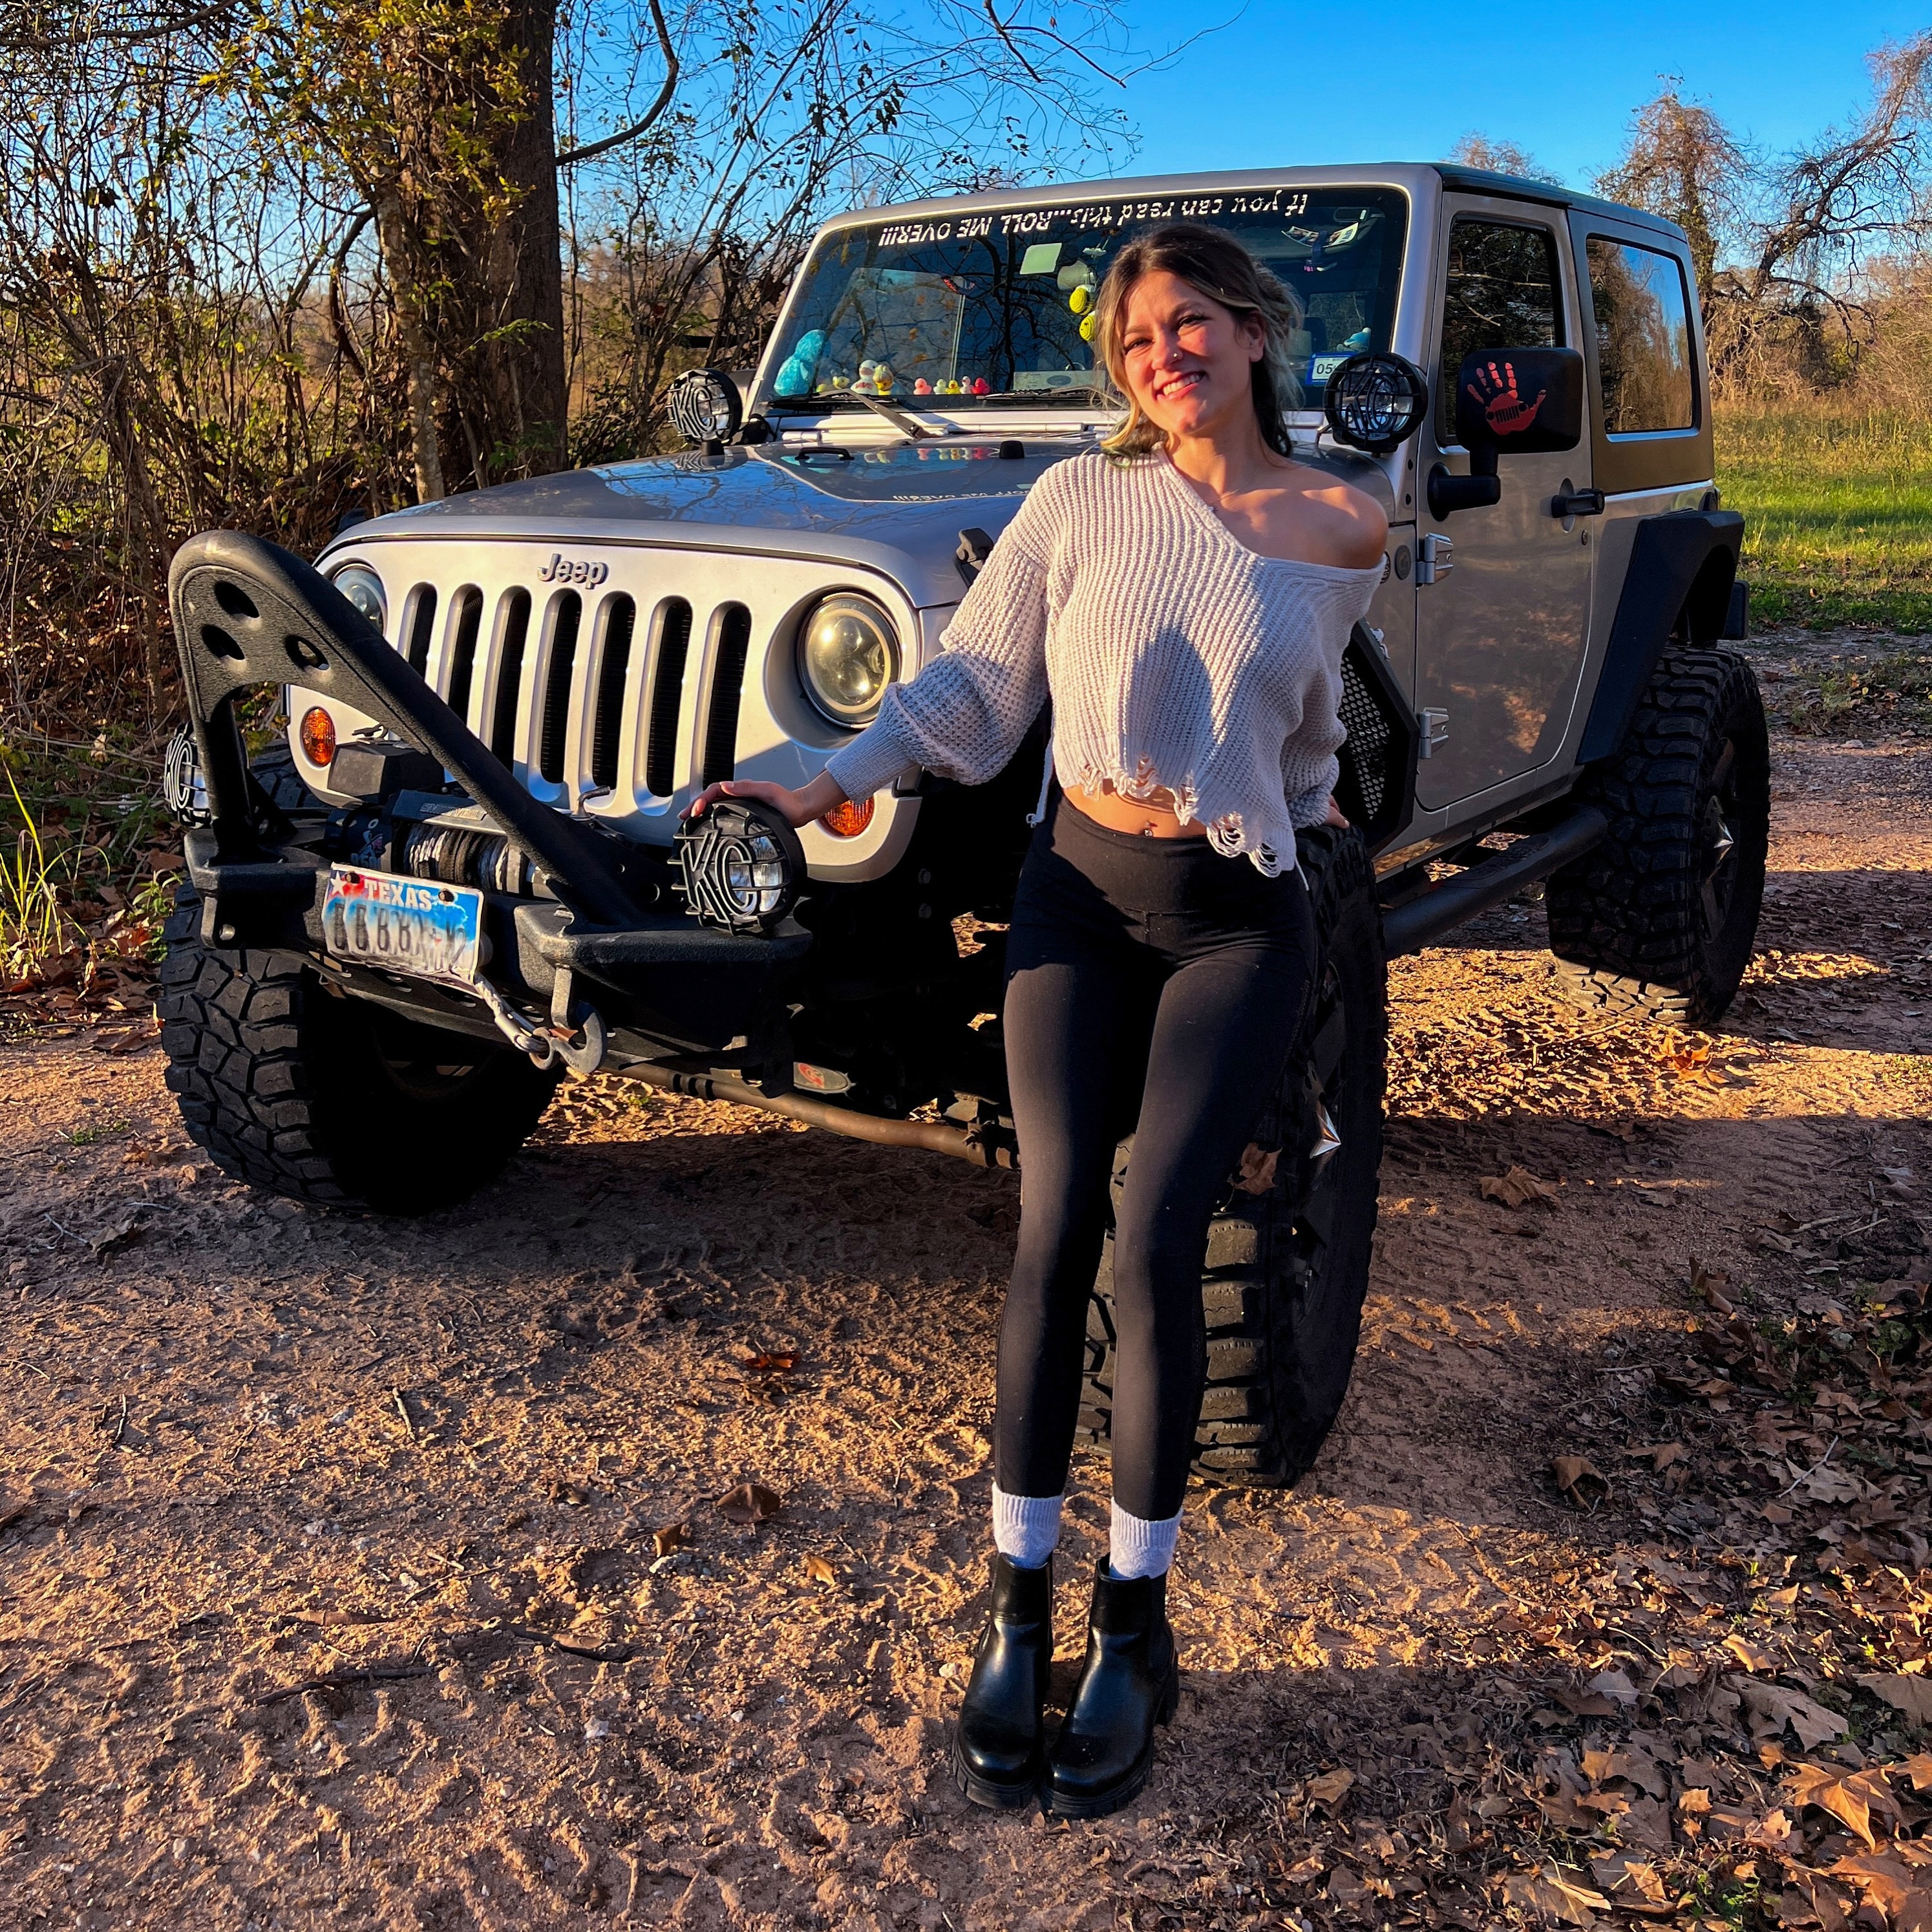 Okay, are we in spring time or no cause I woke up this morning and it was in the 50s again. Come on, Mother Nature, you’re really messing with my seasonal allergies. 🤧 

#Jeepgirl #jeeplife #jeepjk #wrangler #jeepwrangler #mallcrawler #jeepgirlsdoitbetter #adventure #houstonjeeps #jeepgirlslikeitdirty #2doorjeep #jeepbabe #jeep #jeepgirlgang #jeepgirlsrock